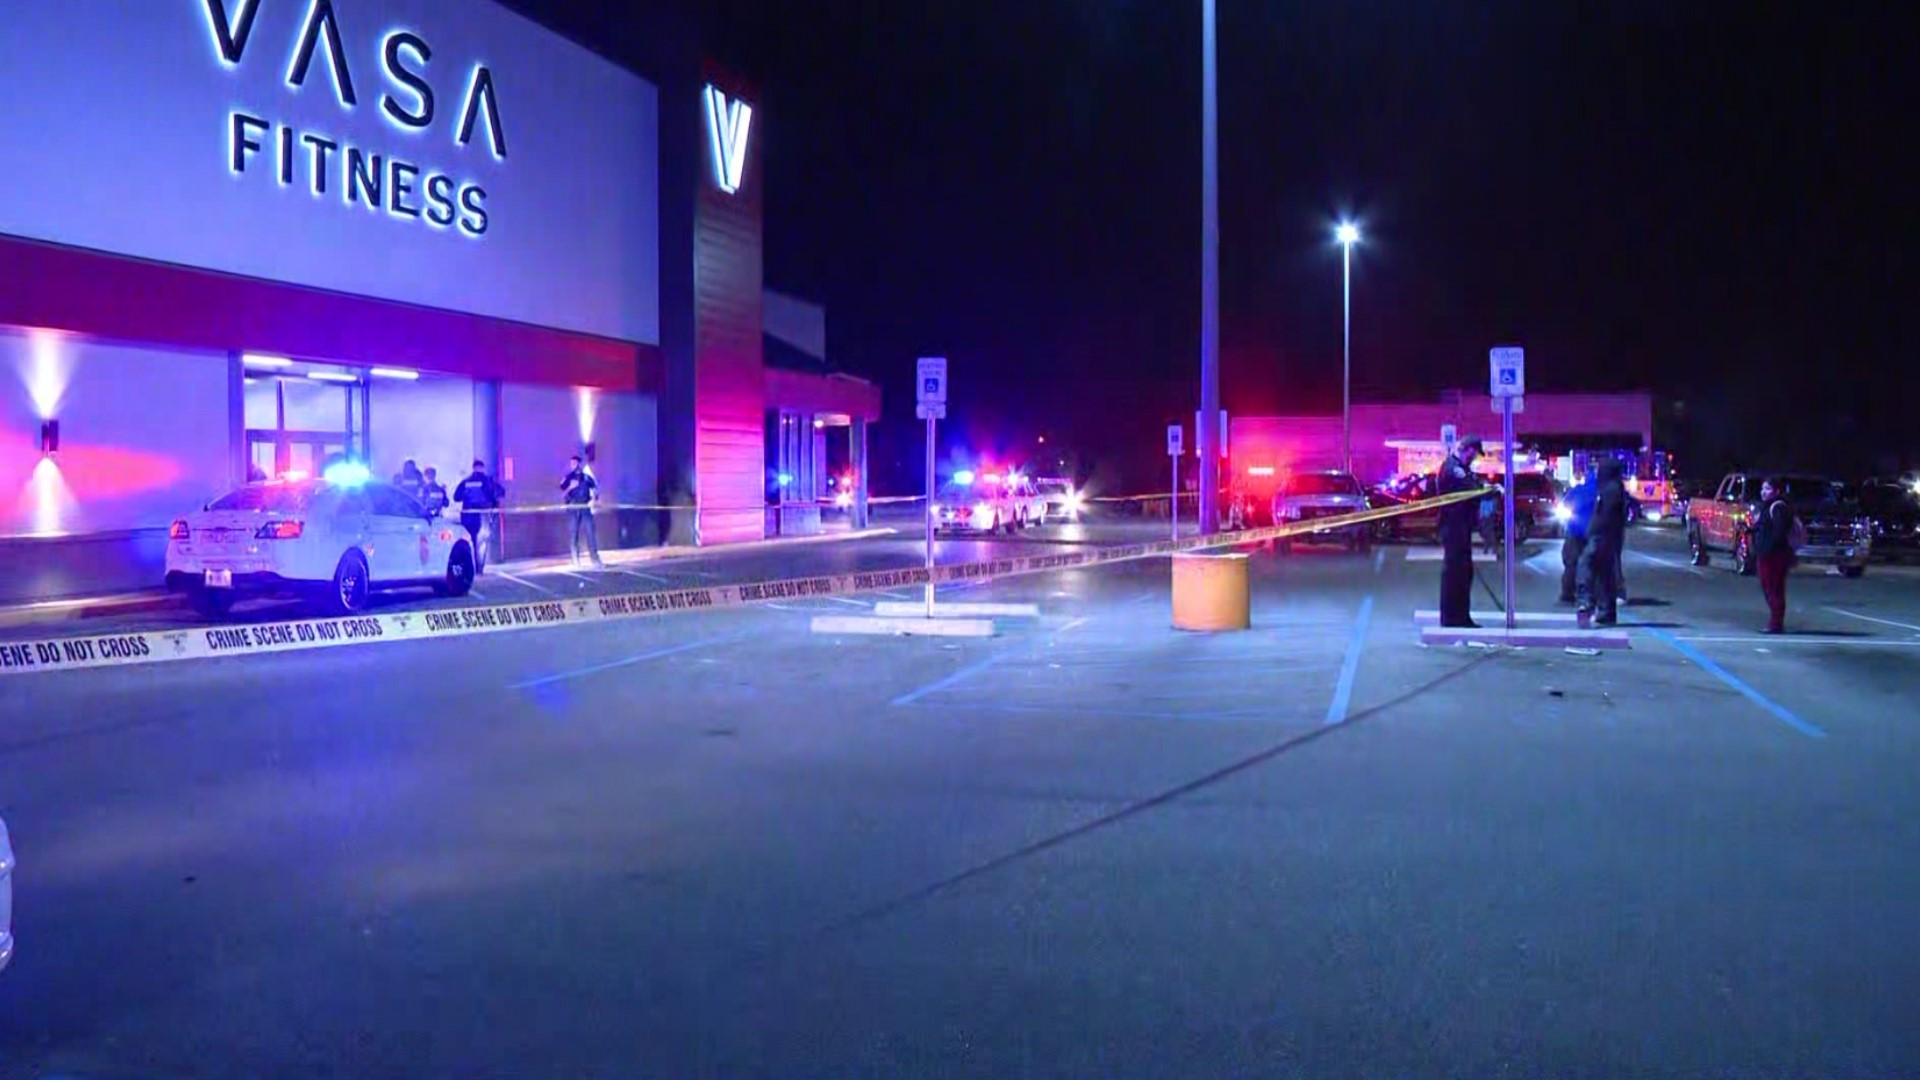 IMPD Capt. Mark McCardia gives an update on a shooting that wounded two people at VASA Fitness on West 38th Street Tuesday night.